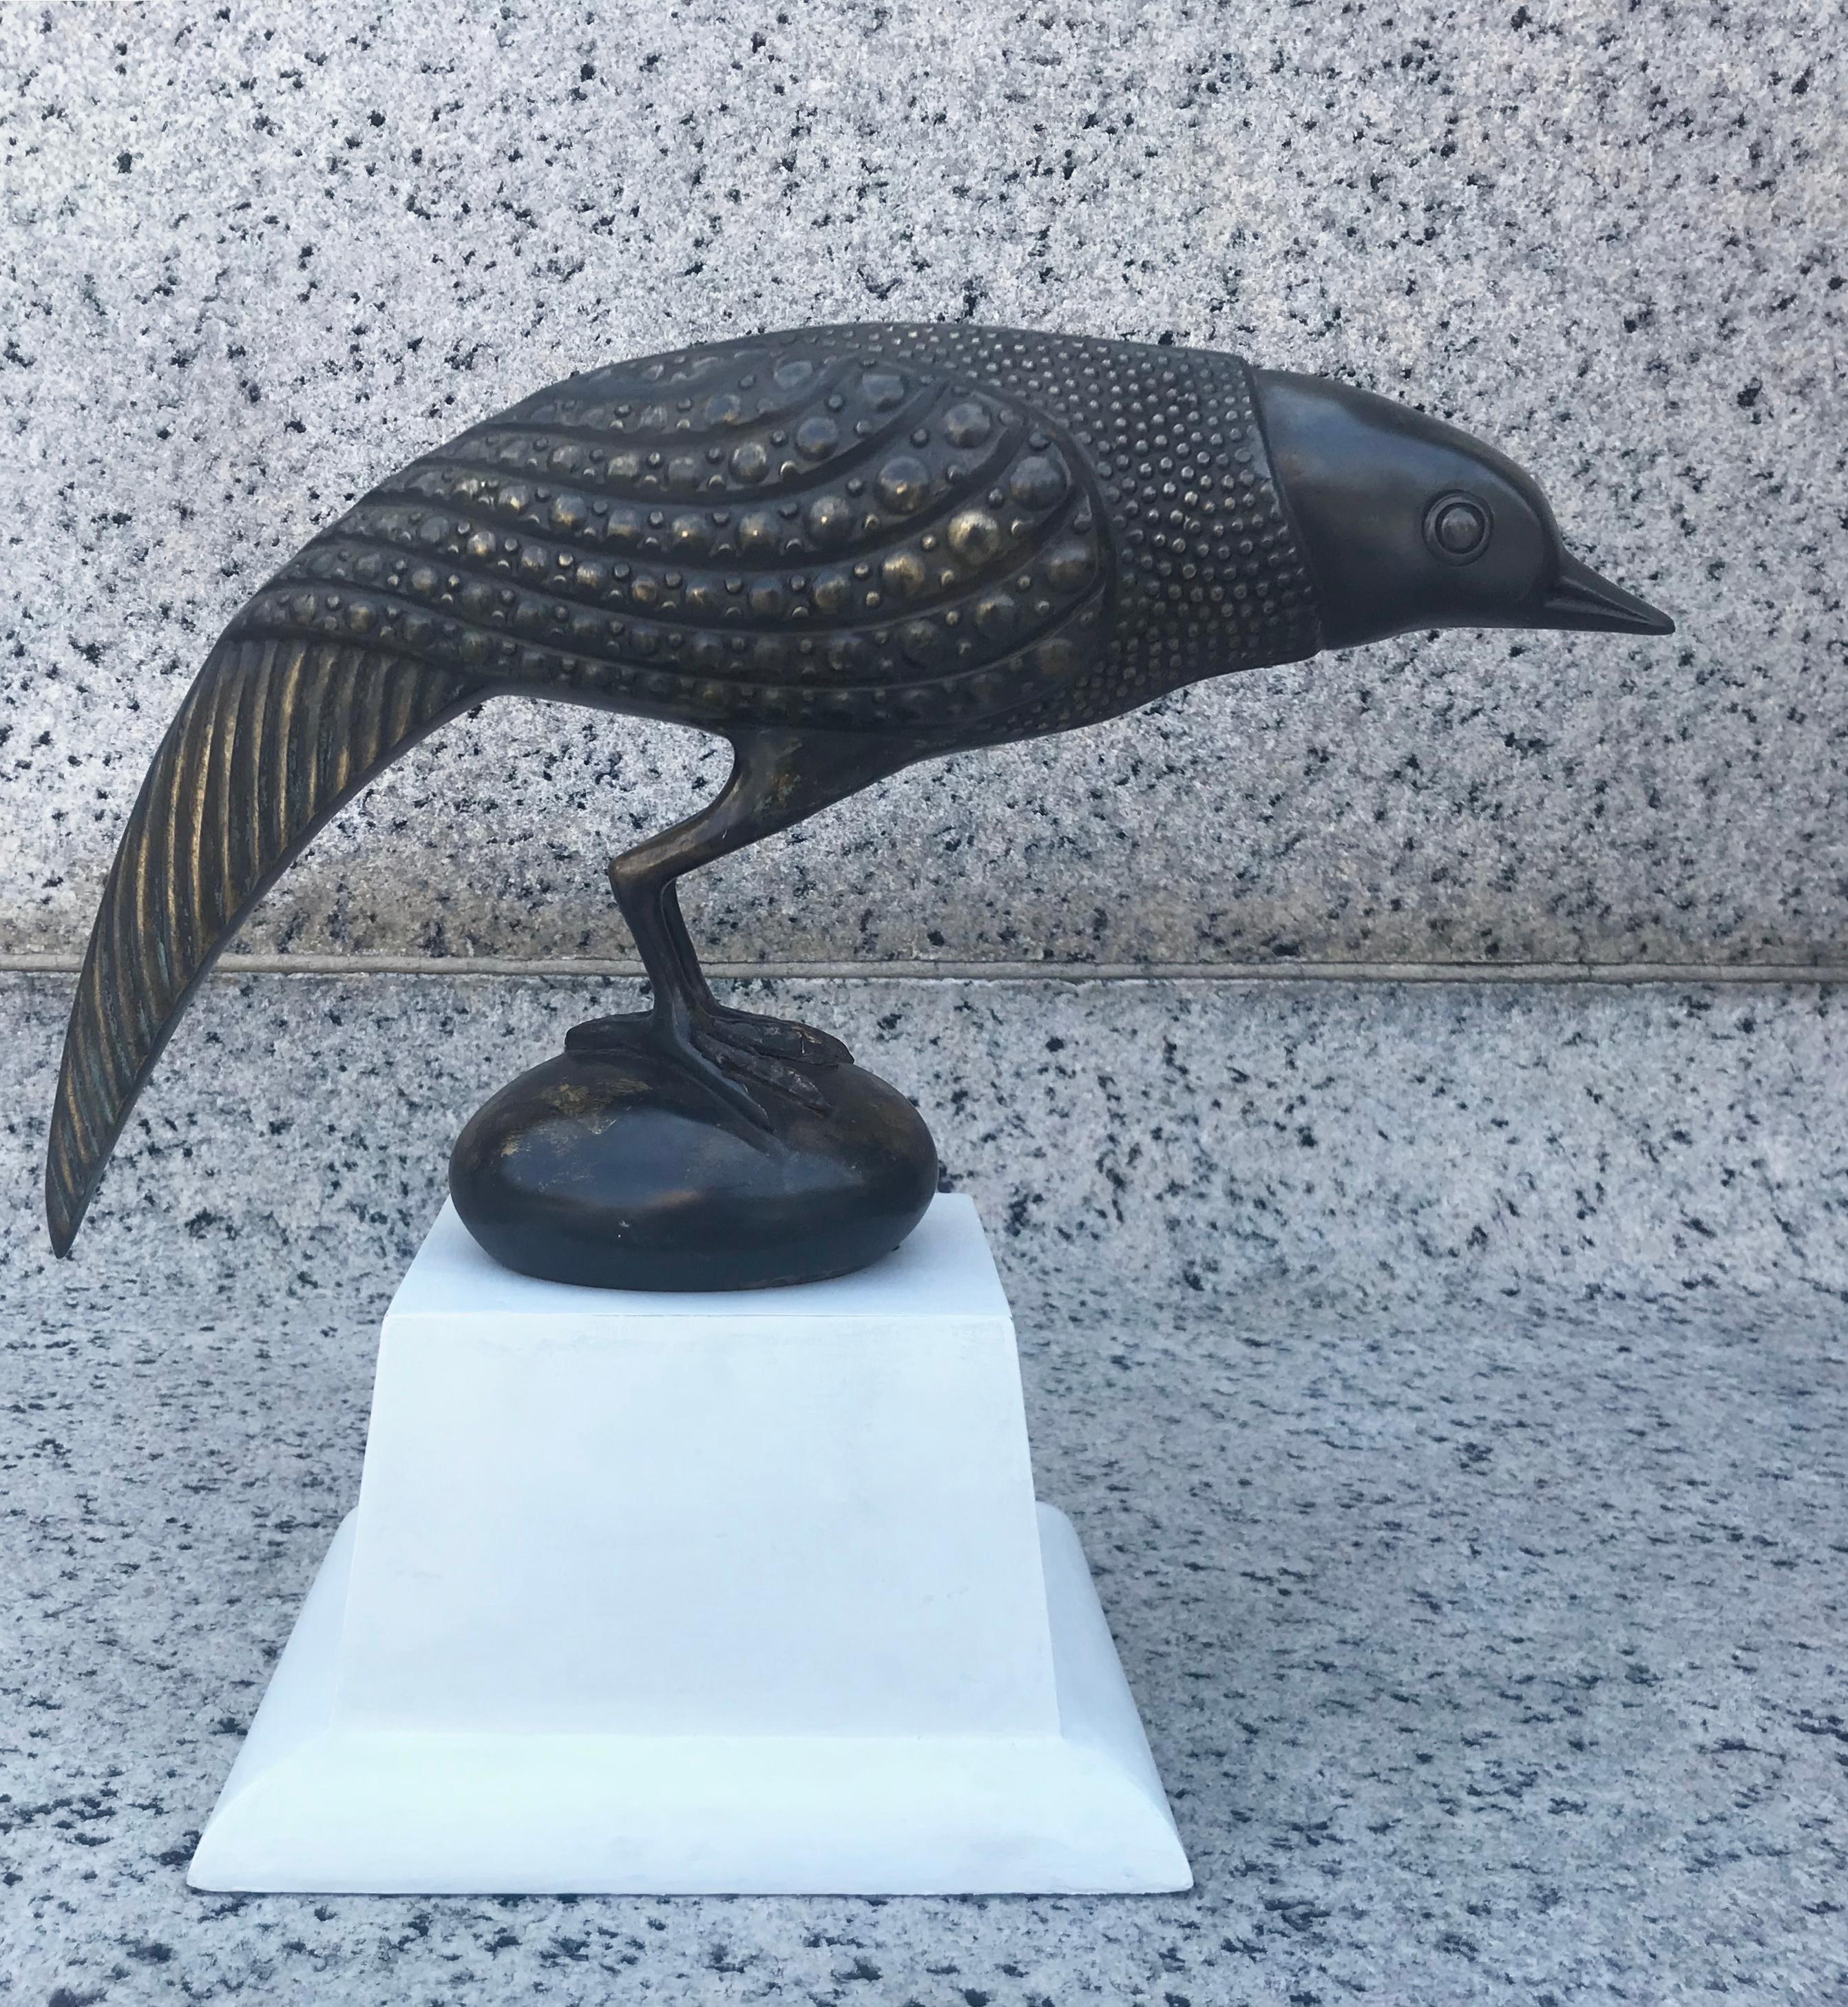 Fabulous 1970s French bronze bird sculpture in the style of Armand Rateau. Mounted on a shaped plaster finish stand. Incredible detail and presence.